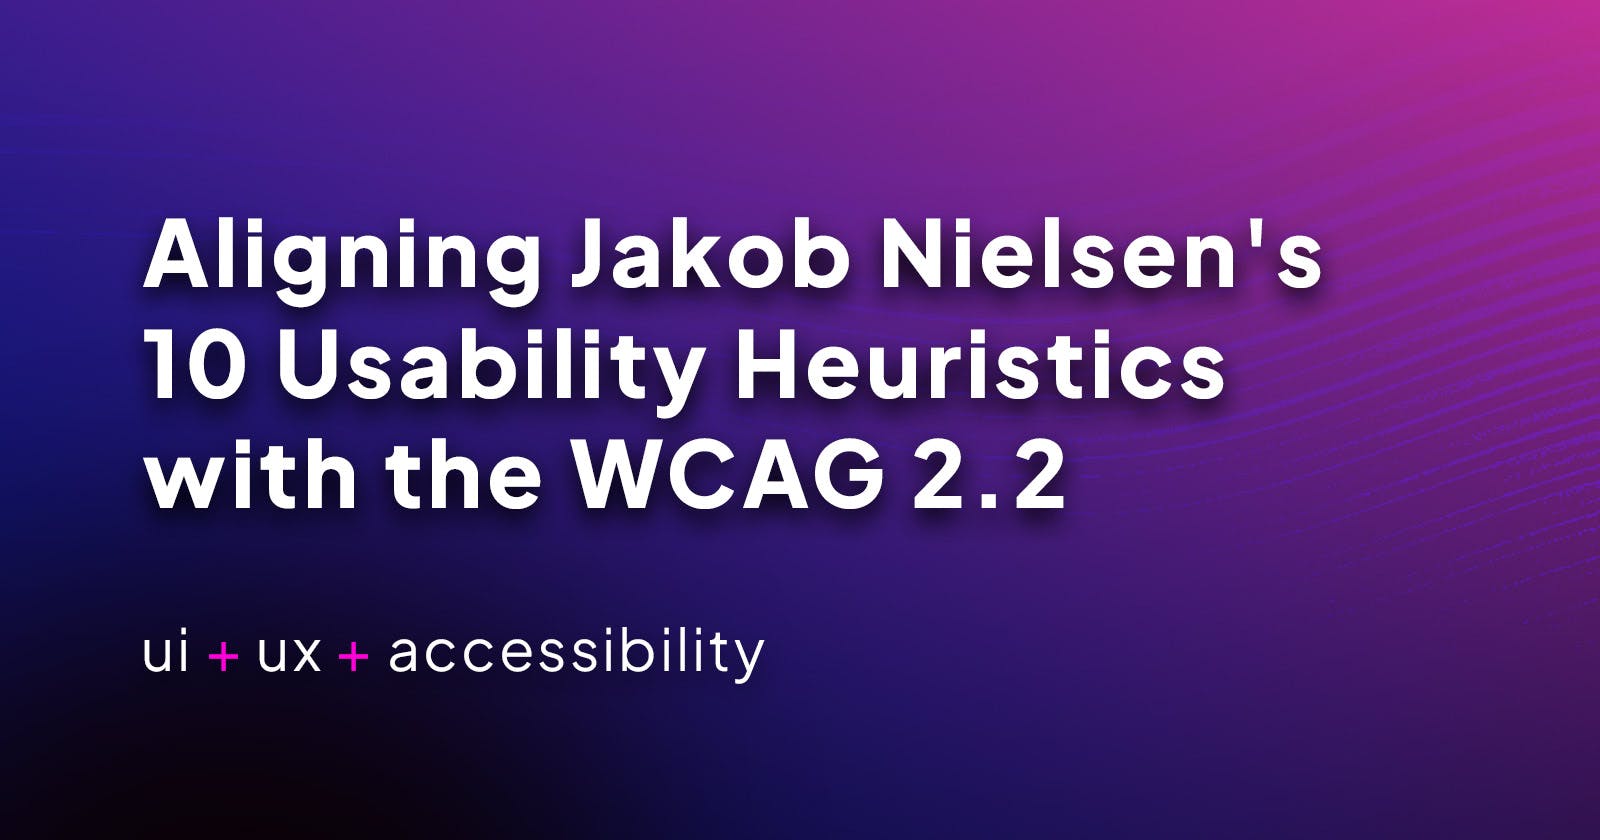 Aligning Jakob Nielsen's 10 Usability Heuristics with the WCAG 2.2